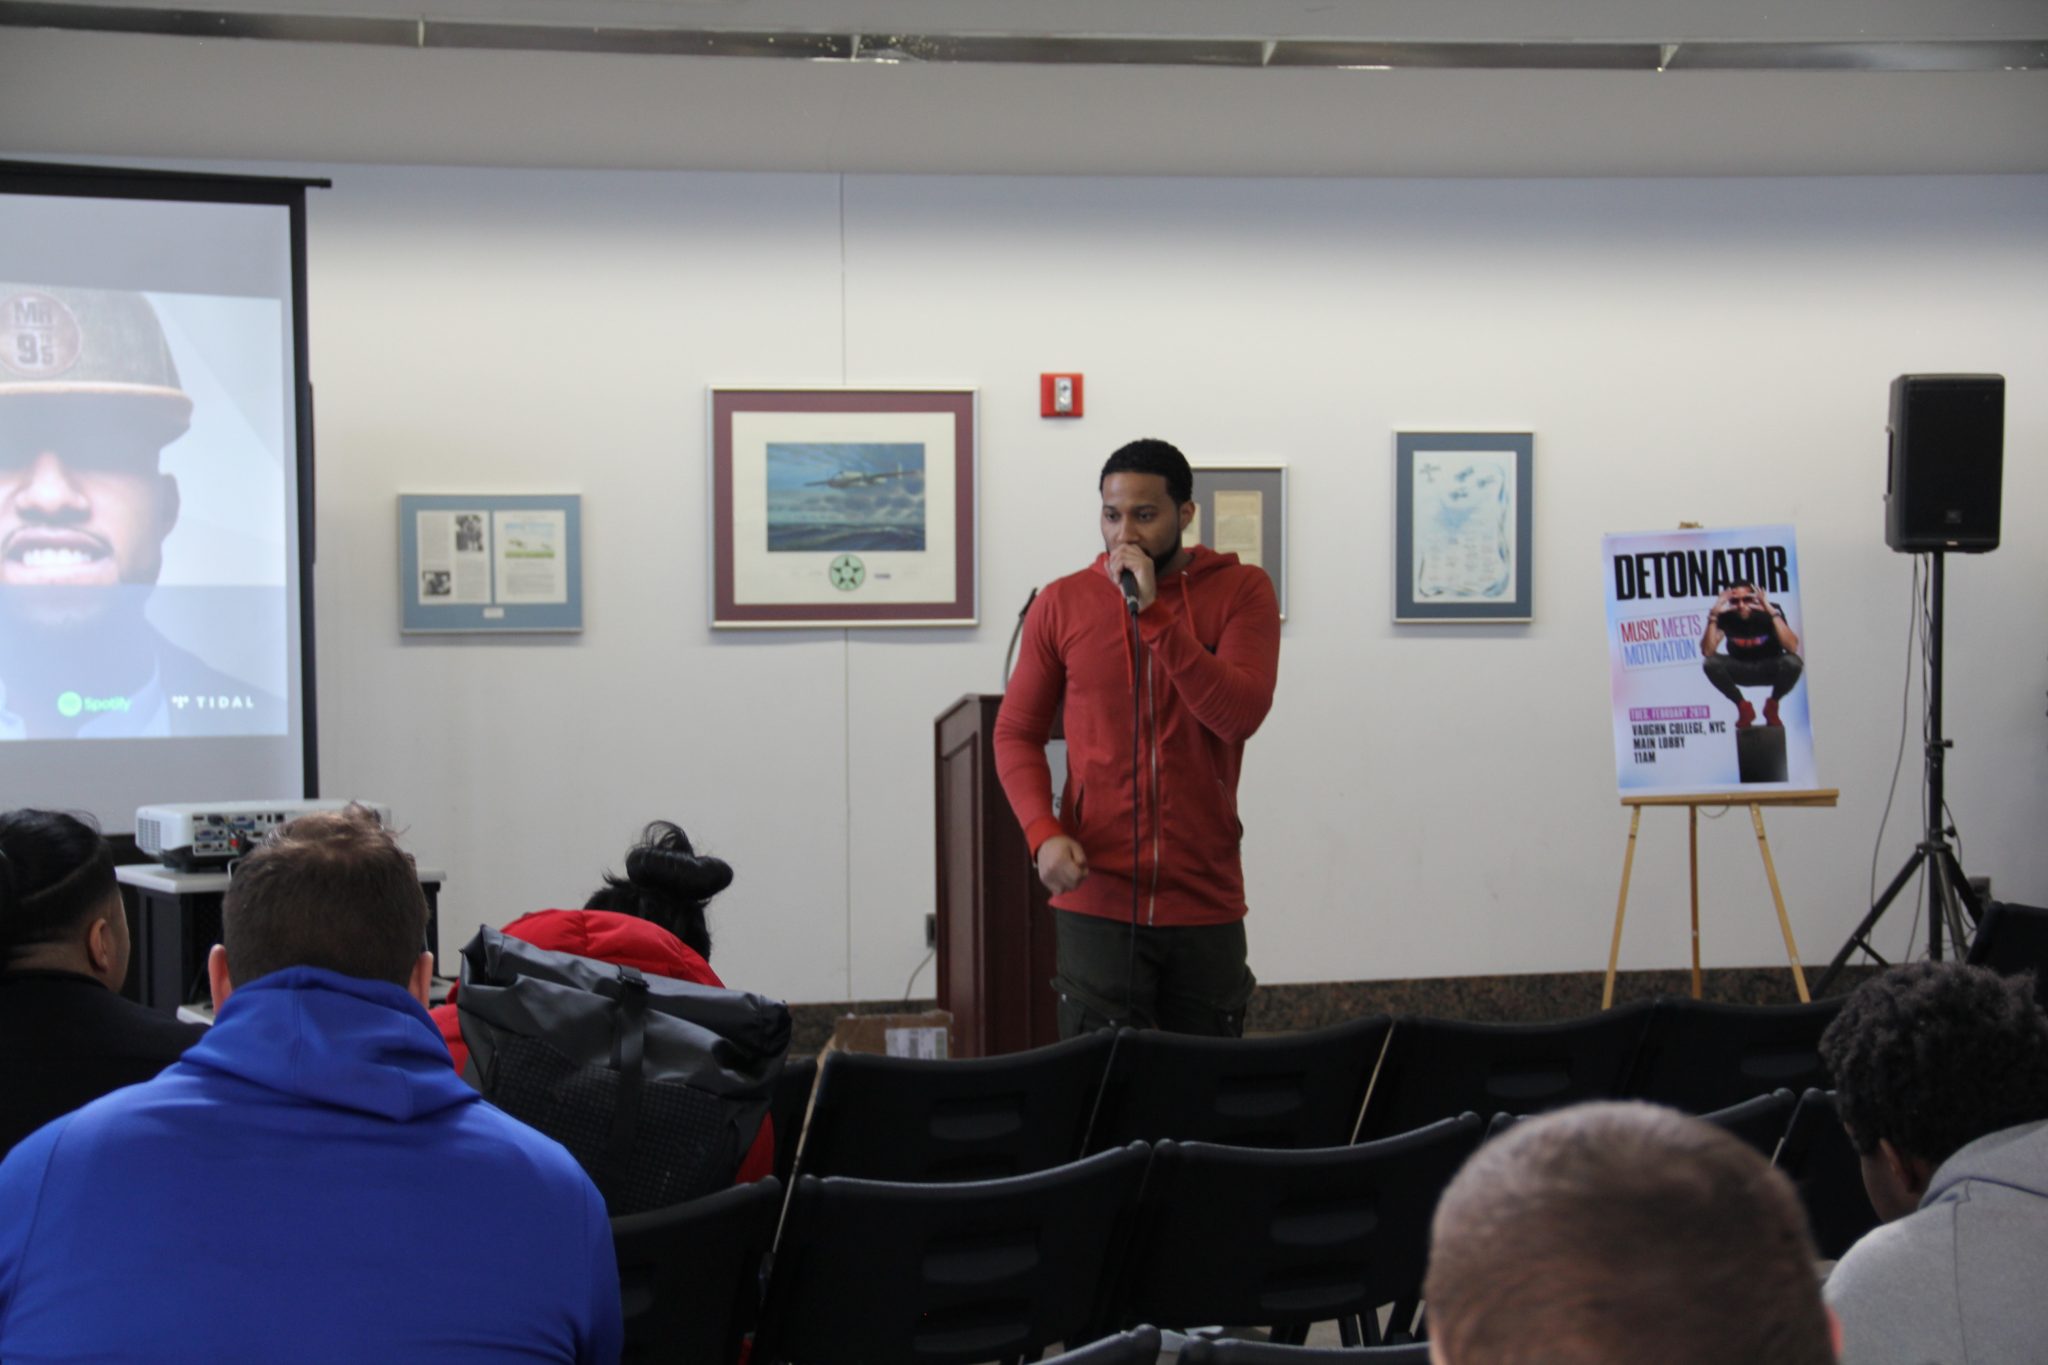 Guest Speaker Encouraged Inclusion during Black History Month